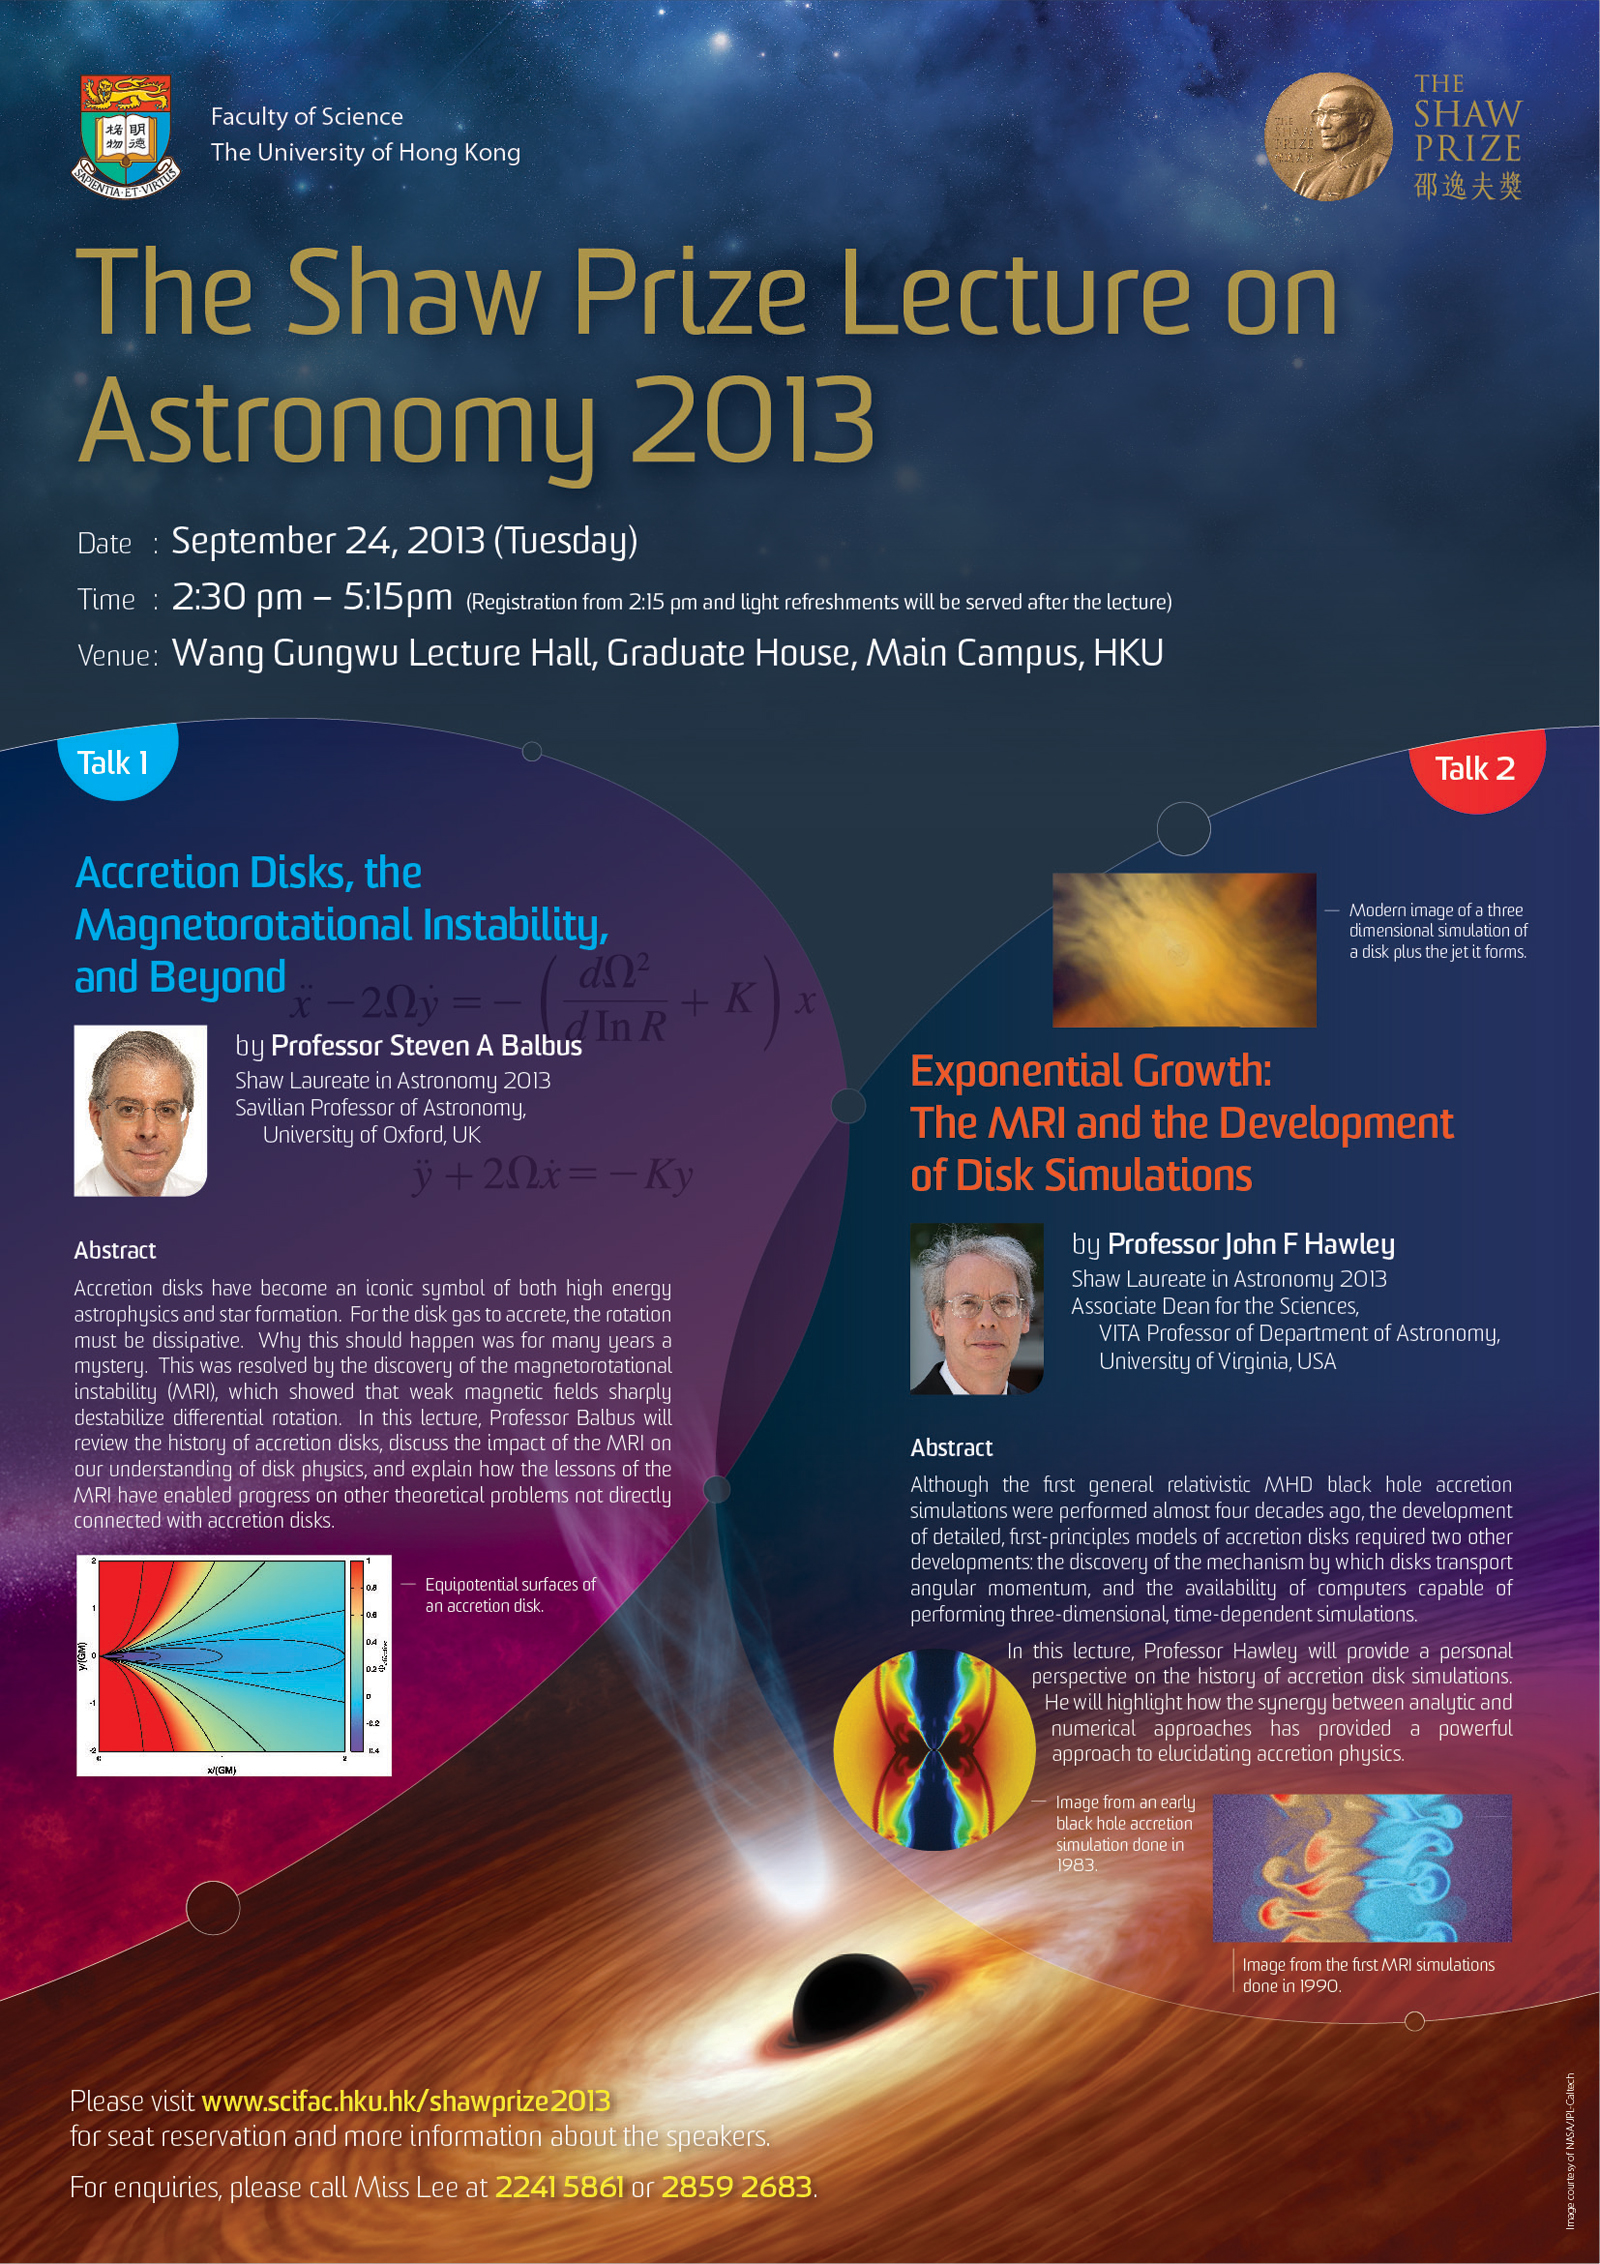 The Shaw Prize Lecture on Astronomy 2013